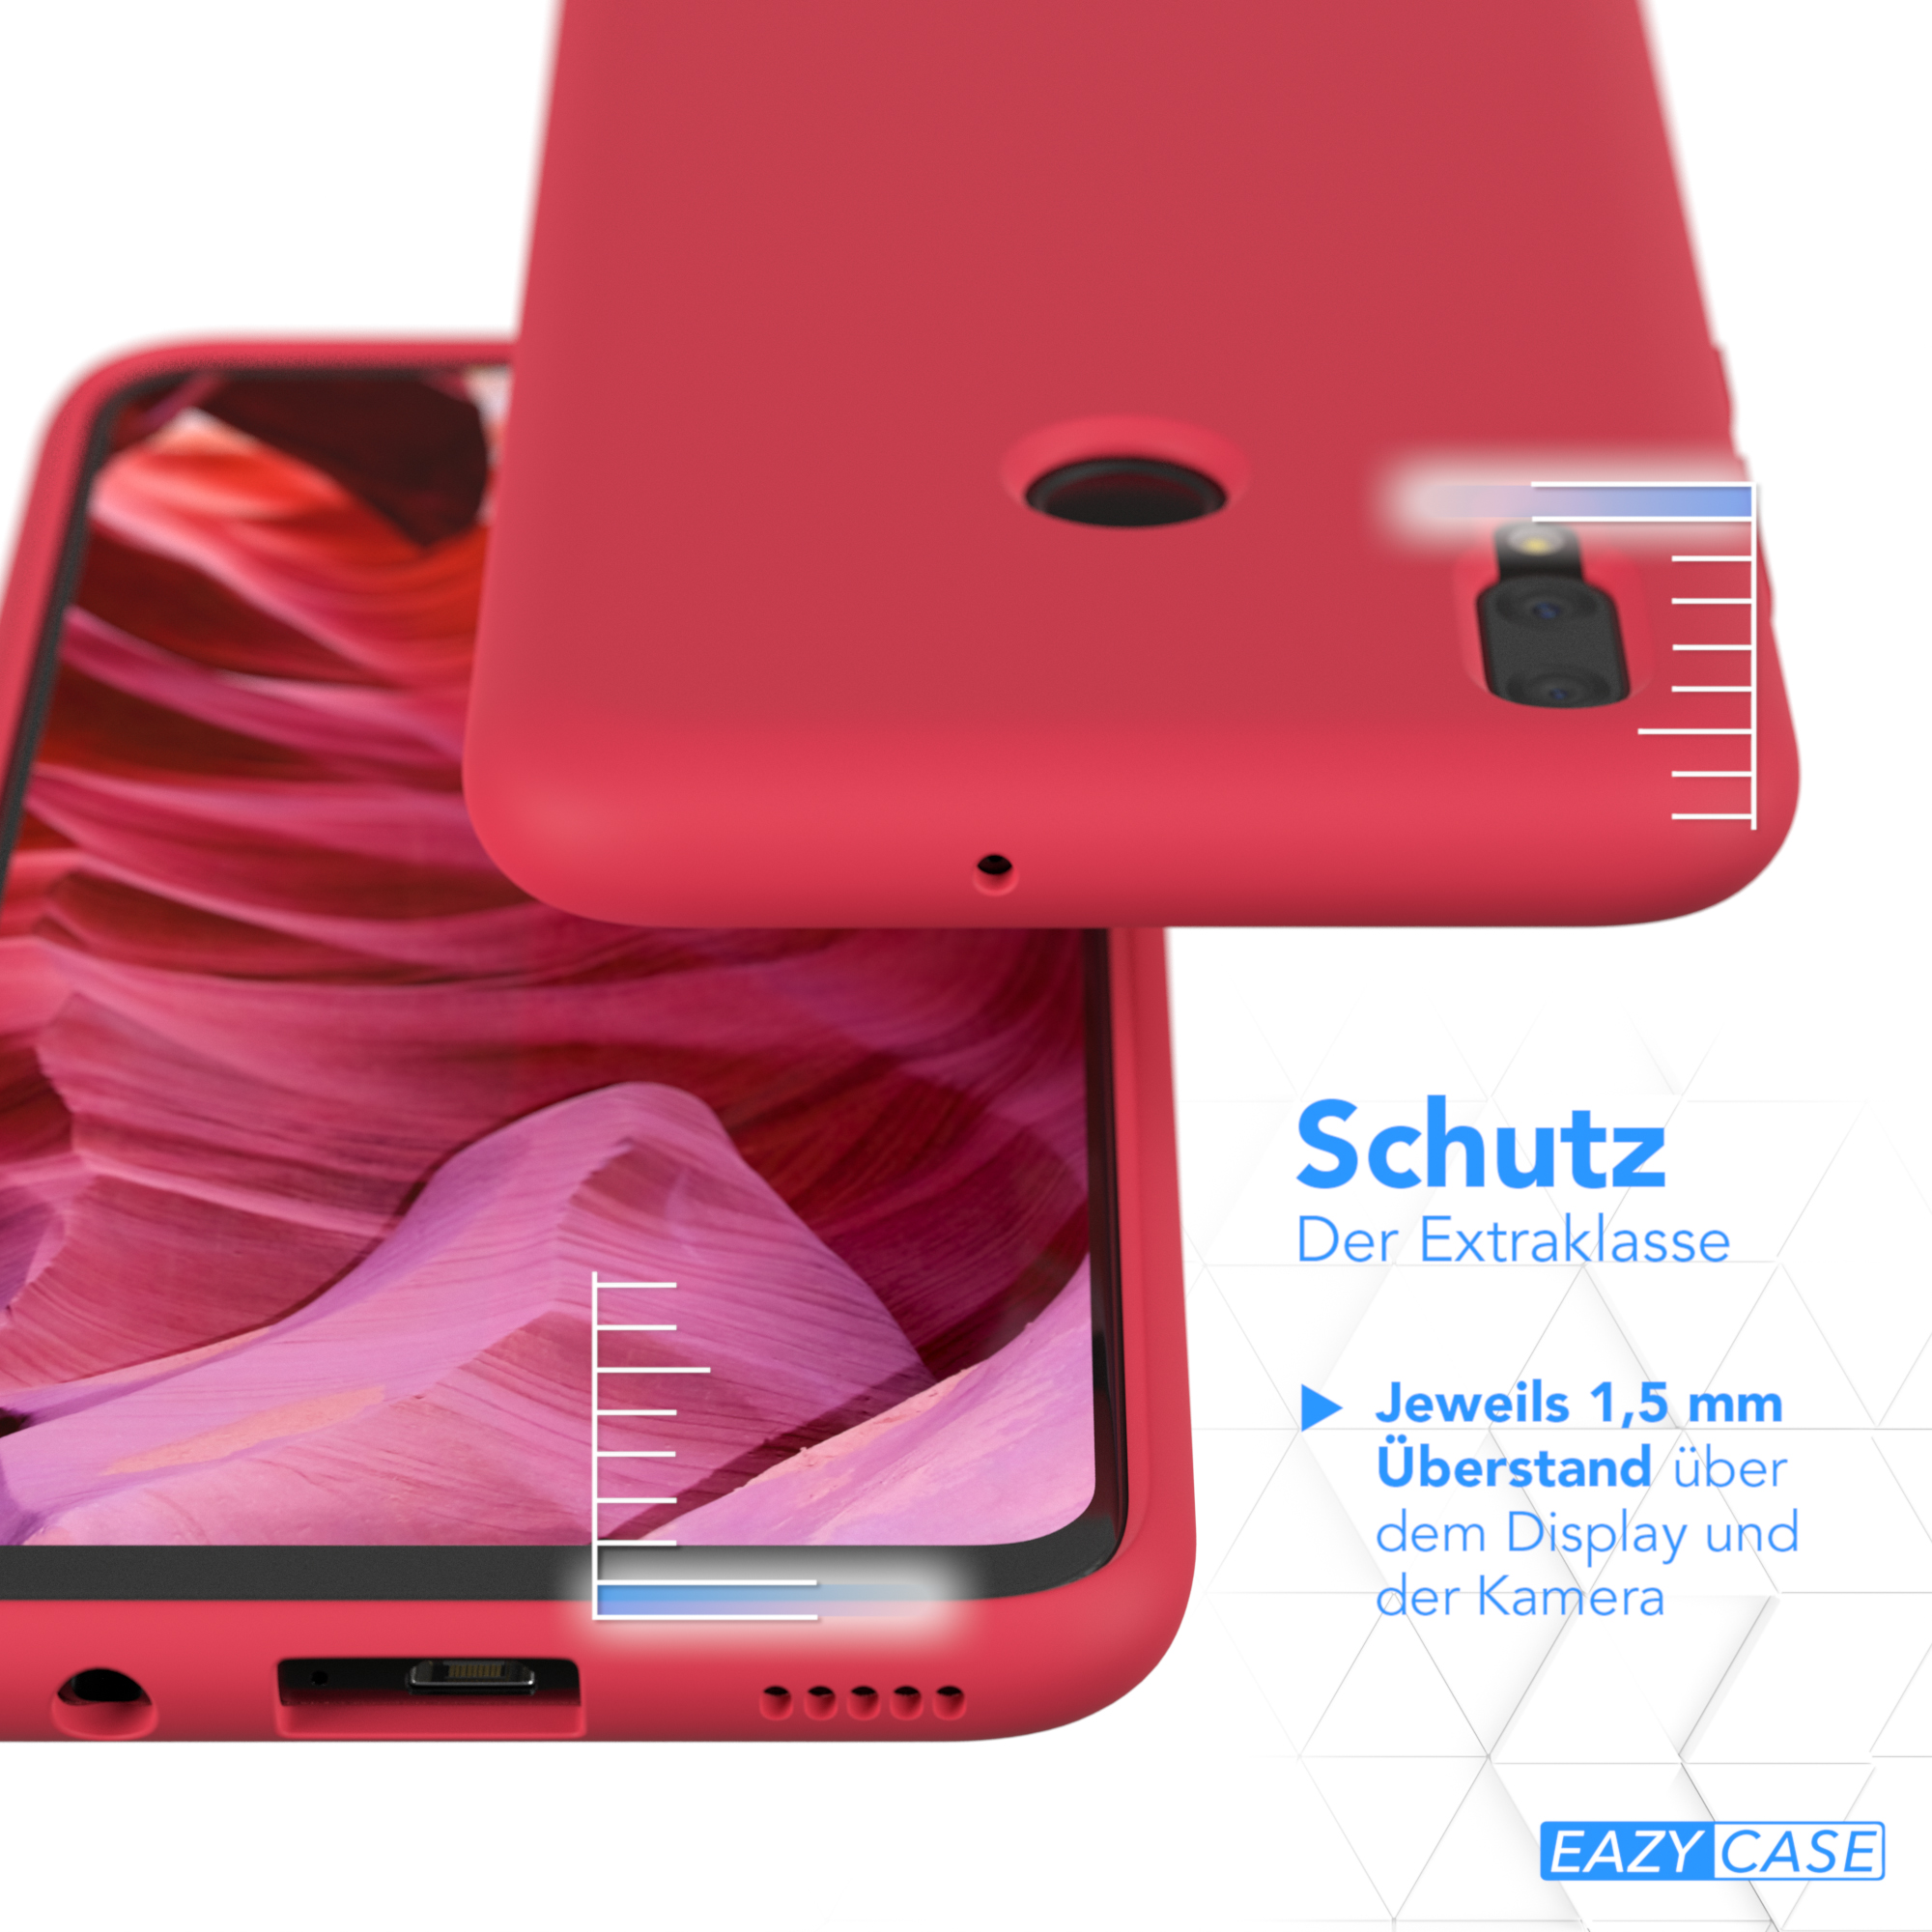 EAZY CASE Premium Silikon Beere / Backcover, (2019), Rot Huawei, P Handycase, Smart